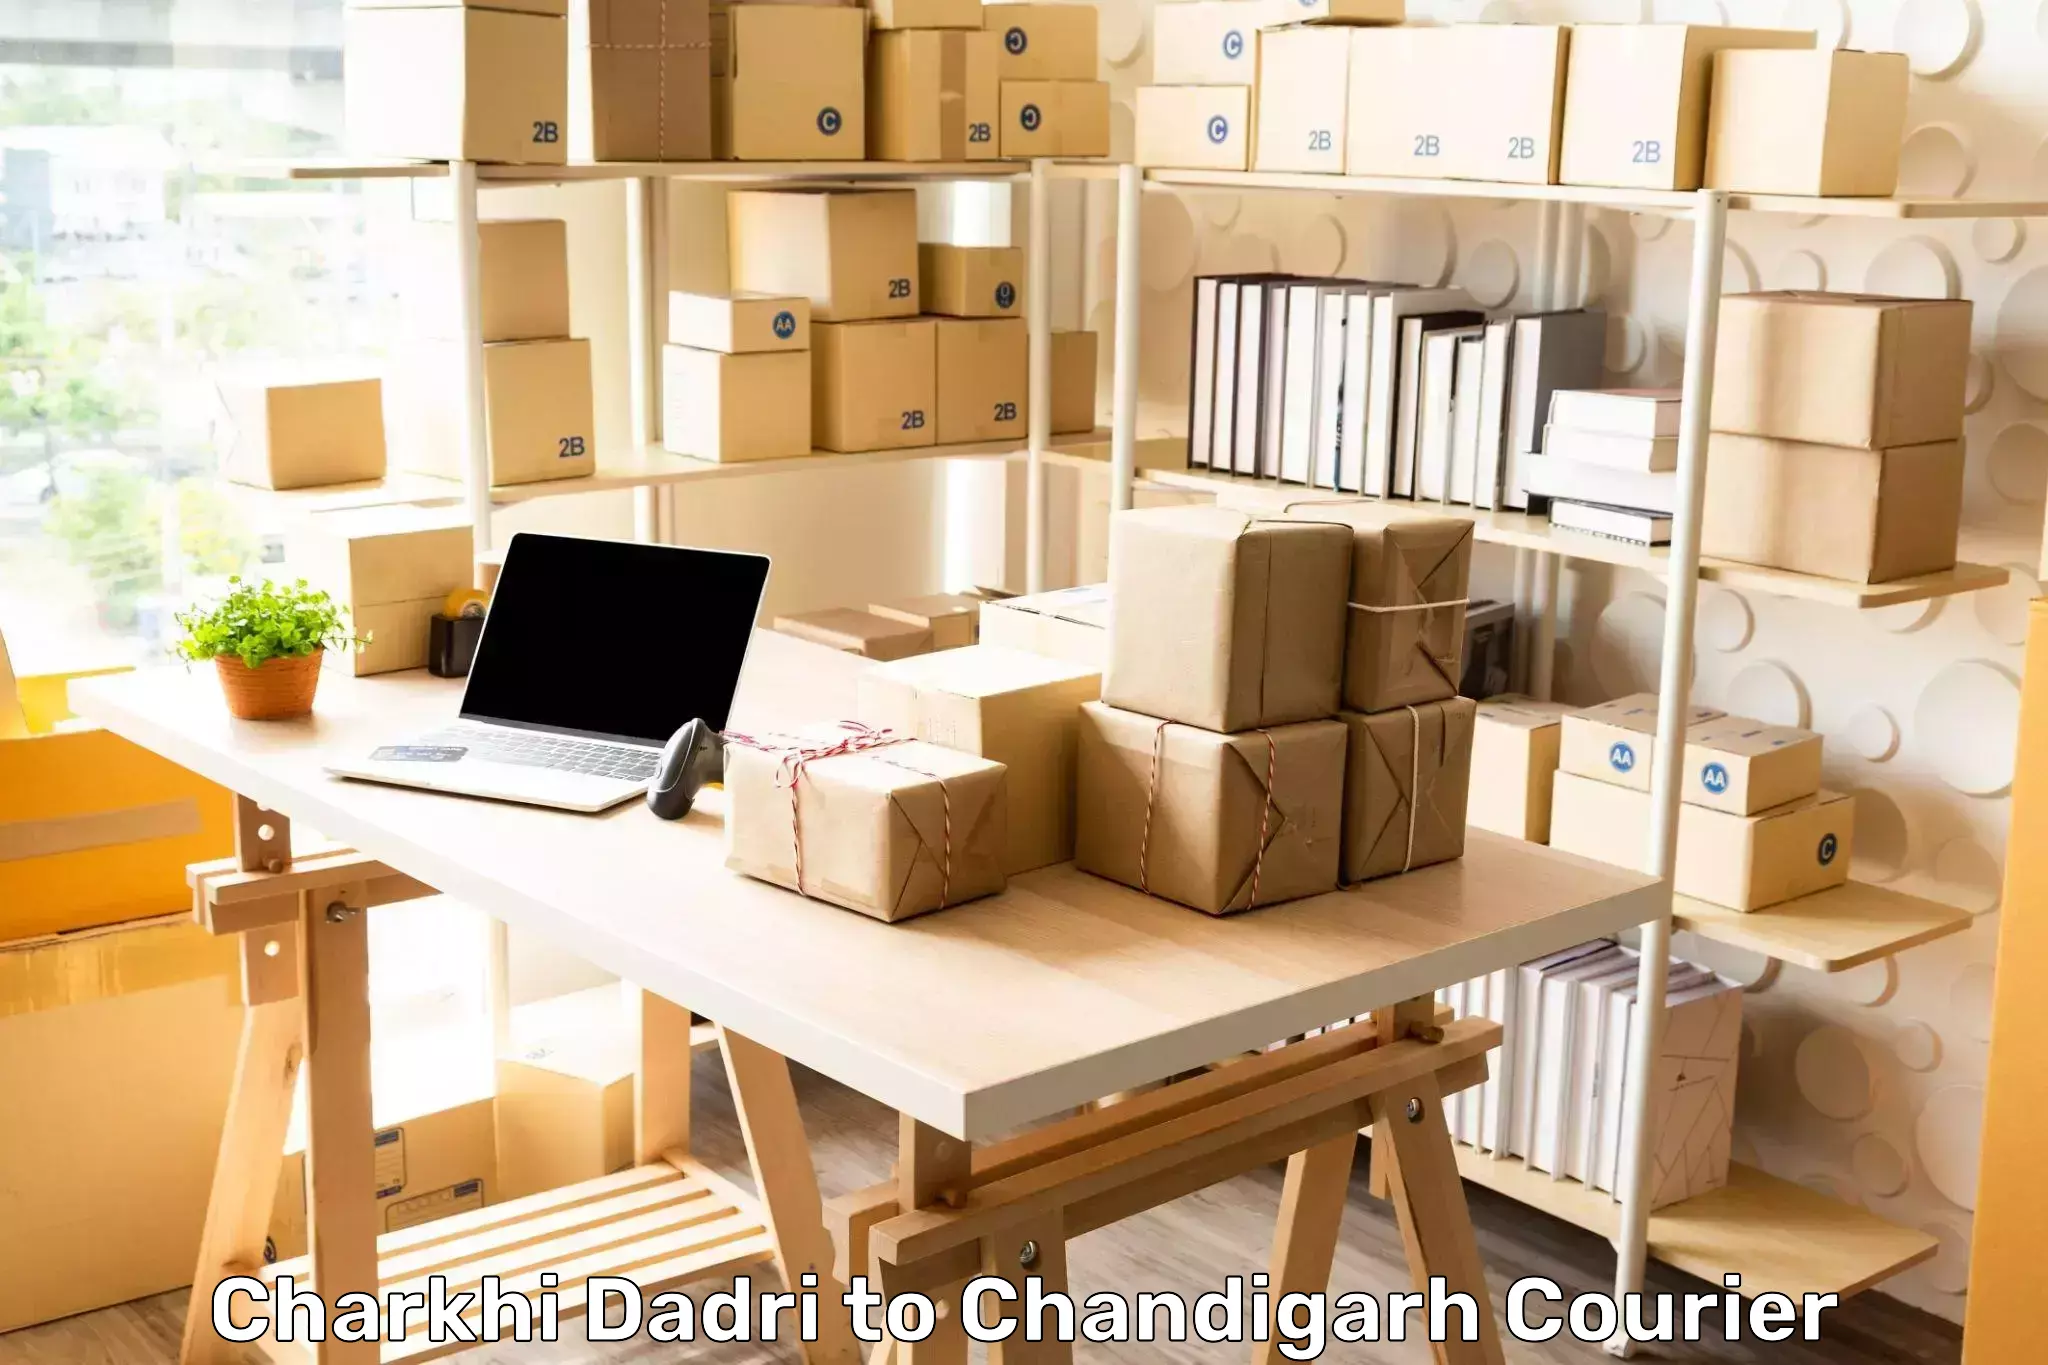 User-friendly delivery service Charkhi Dadri to Chandigarh